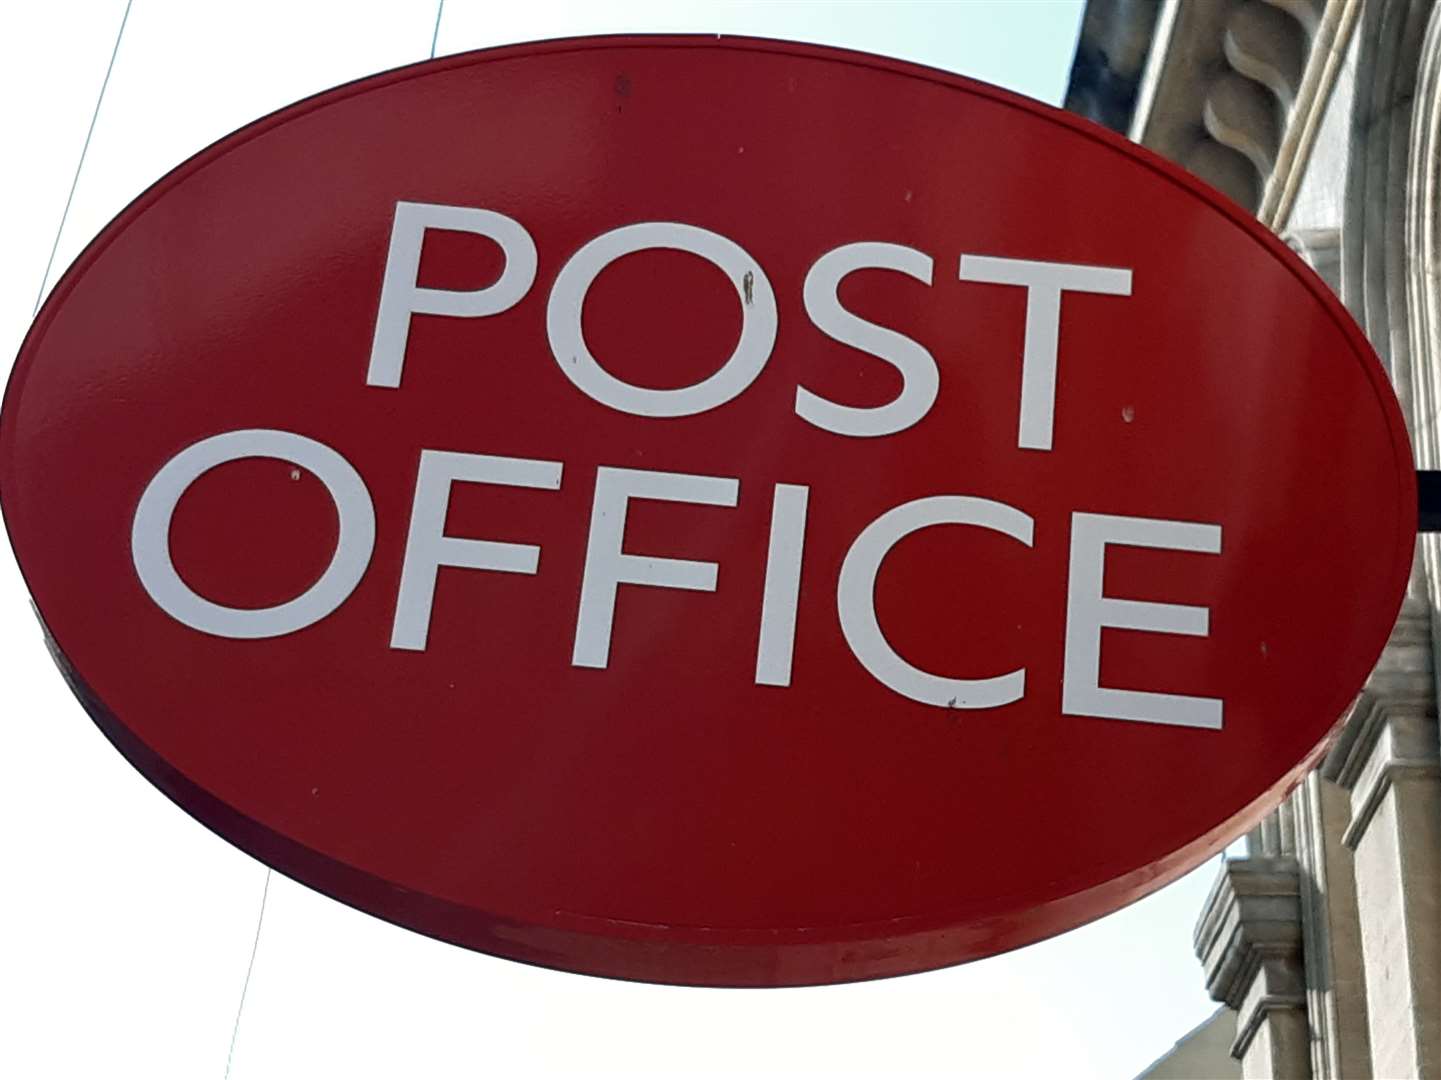 The Post Office has launched a Save Our Cash campaign